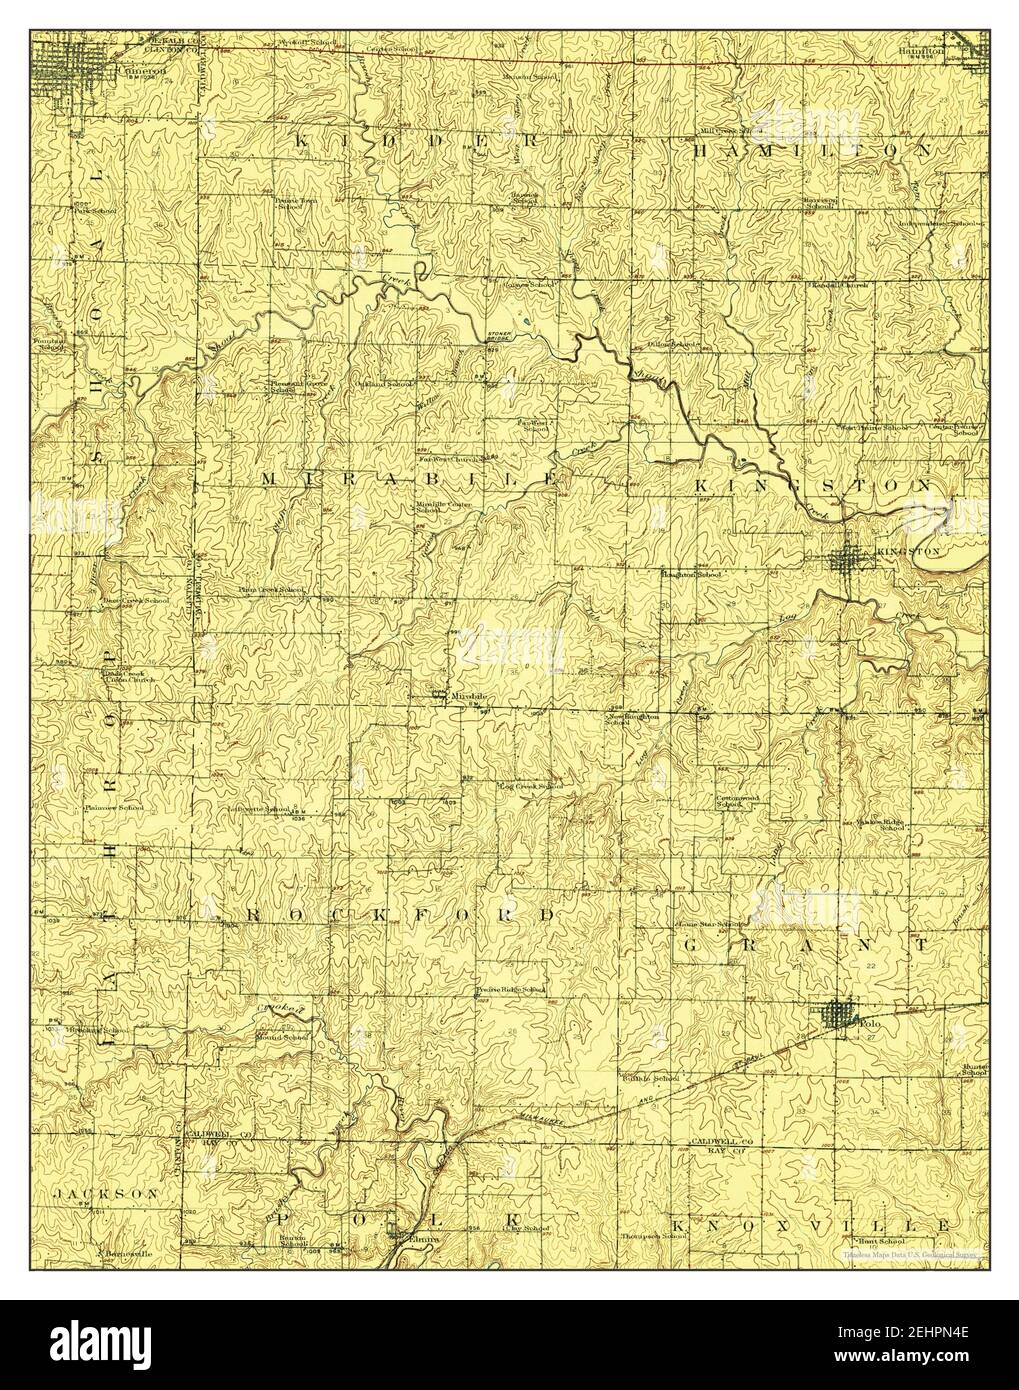 Polo, Missouri, map 1924, 1:62500, United States of America by Timeless Maps, data U.S. Geological Survey Stock Photo